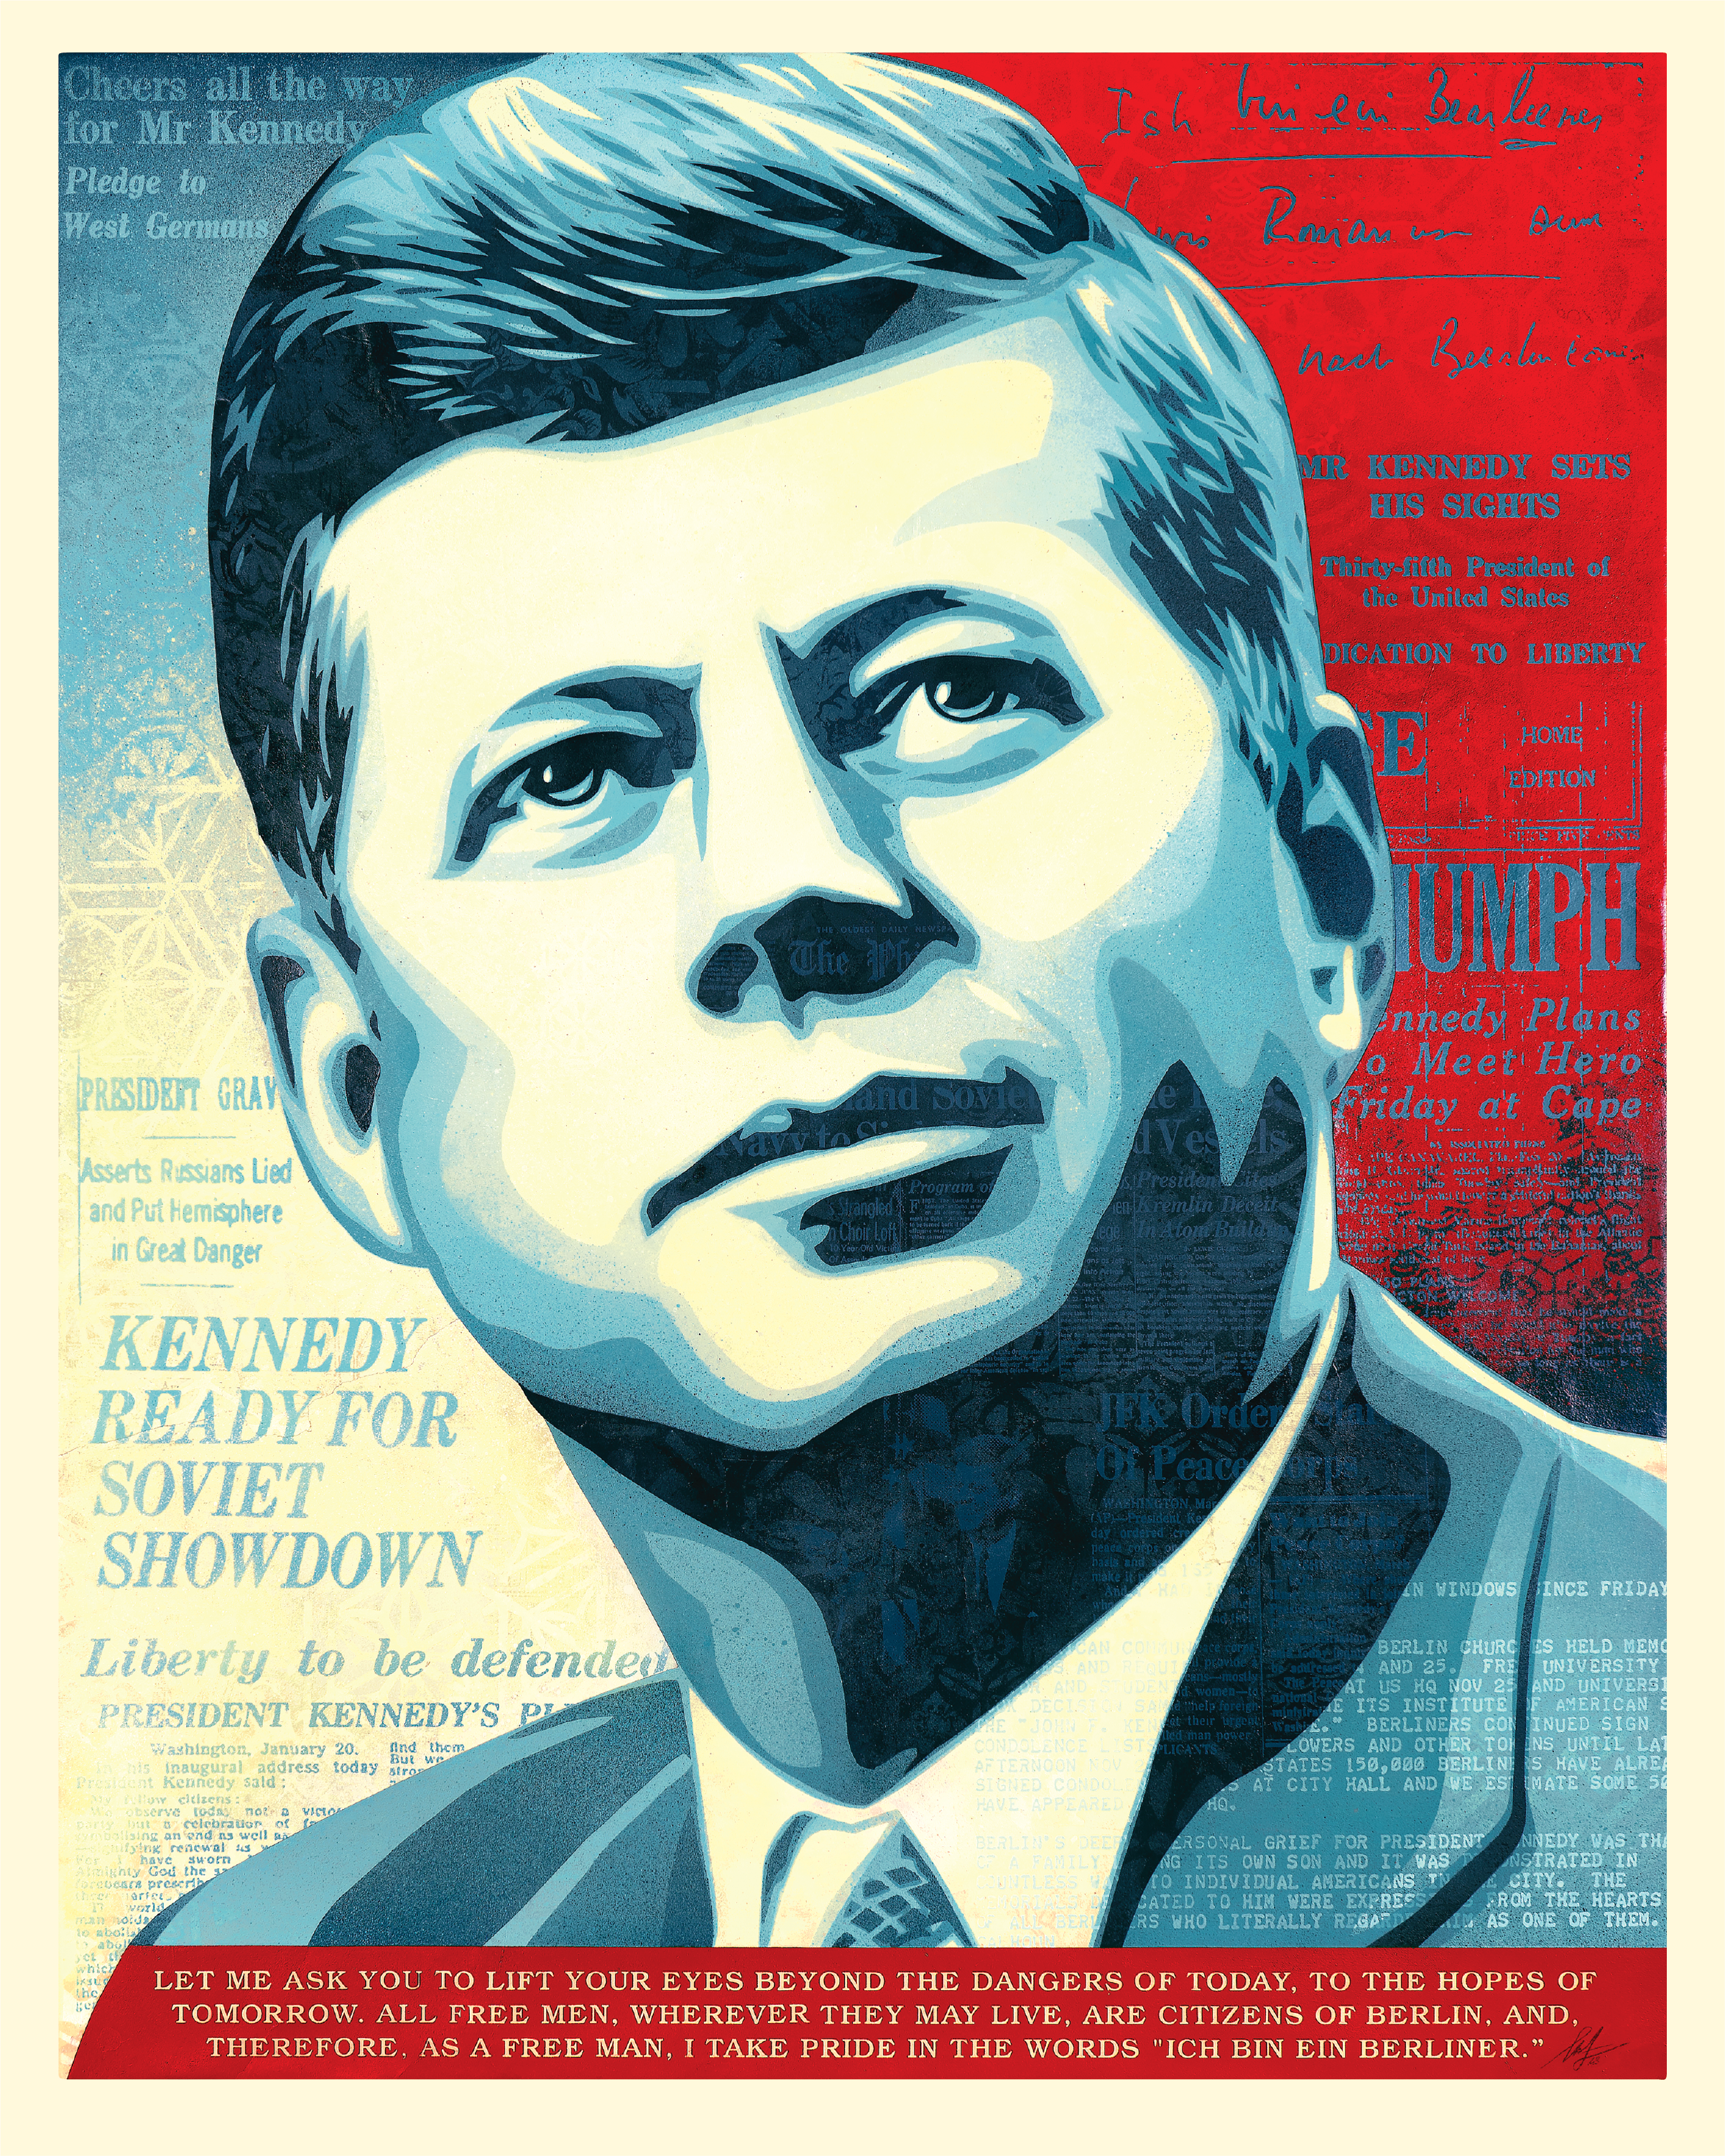 JFK at the Berlin Wall: A Limited-Edition Collection